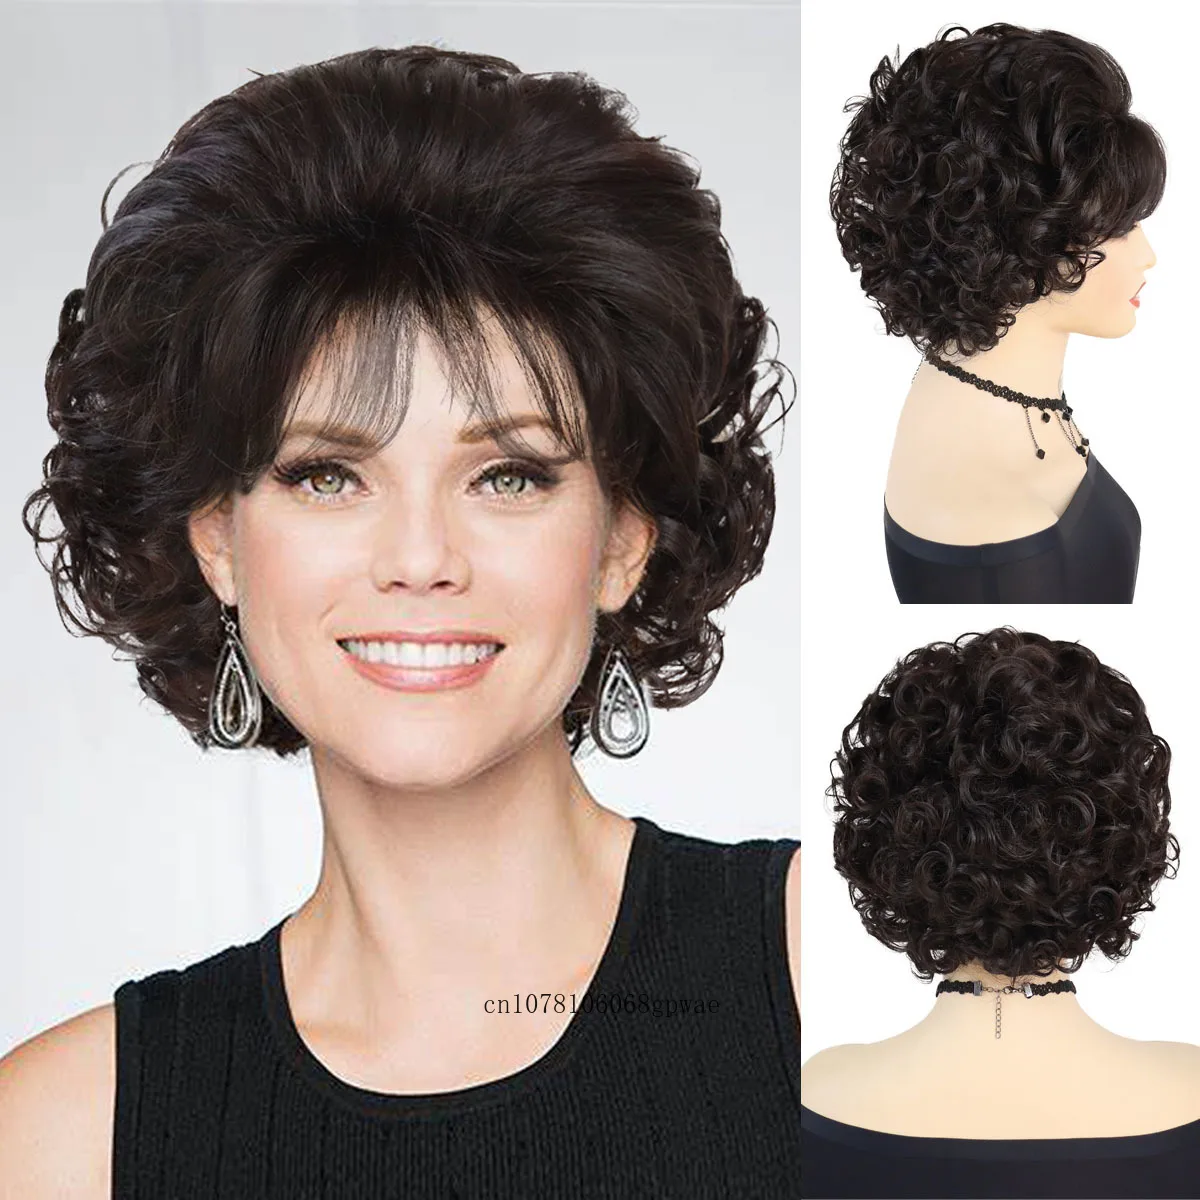 

Short Curly Wig with Bangs Synthetic Hair Dark Brown Wigs for Women Natural Daily Party Use Fashion Elegant Mommy Wig Ladies